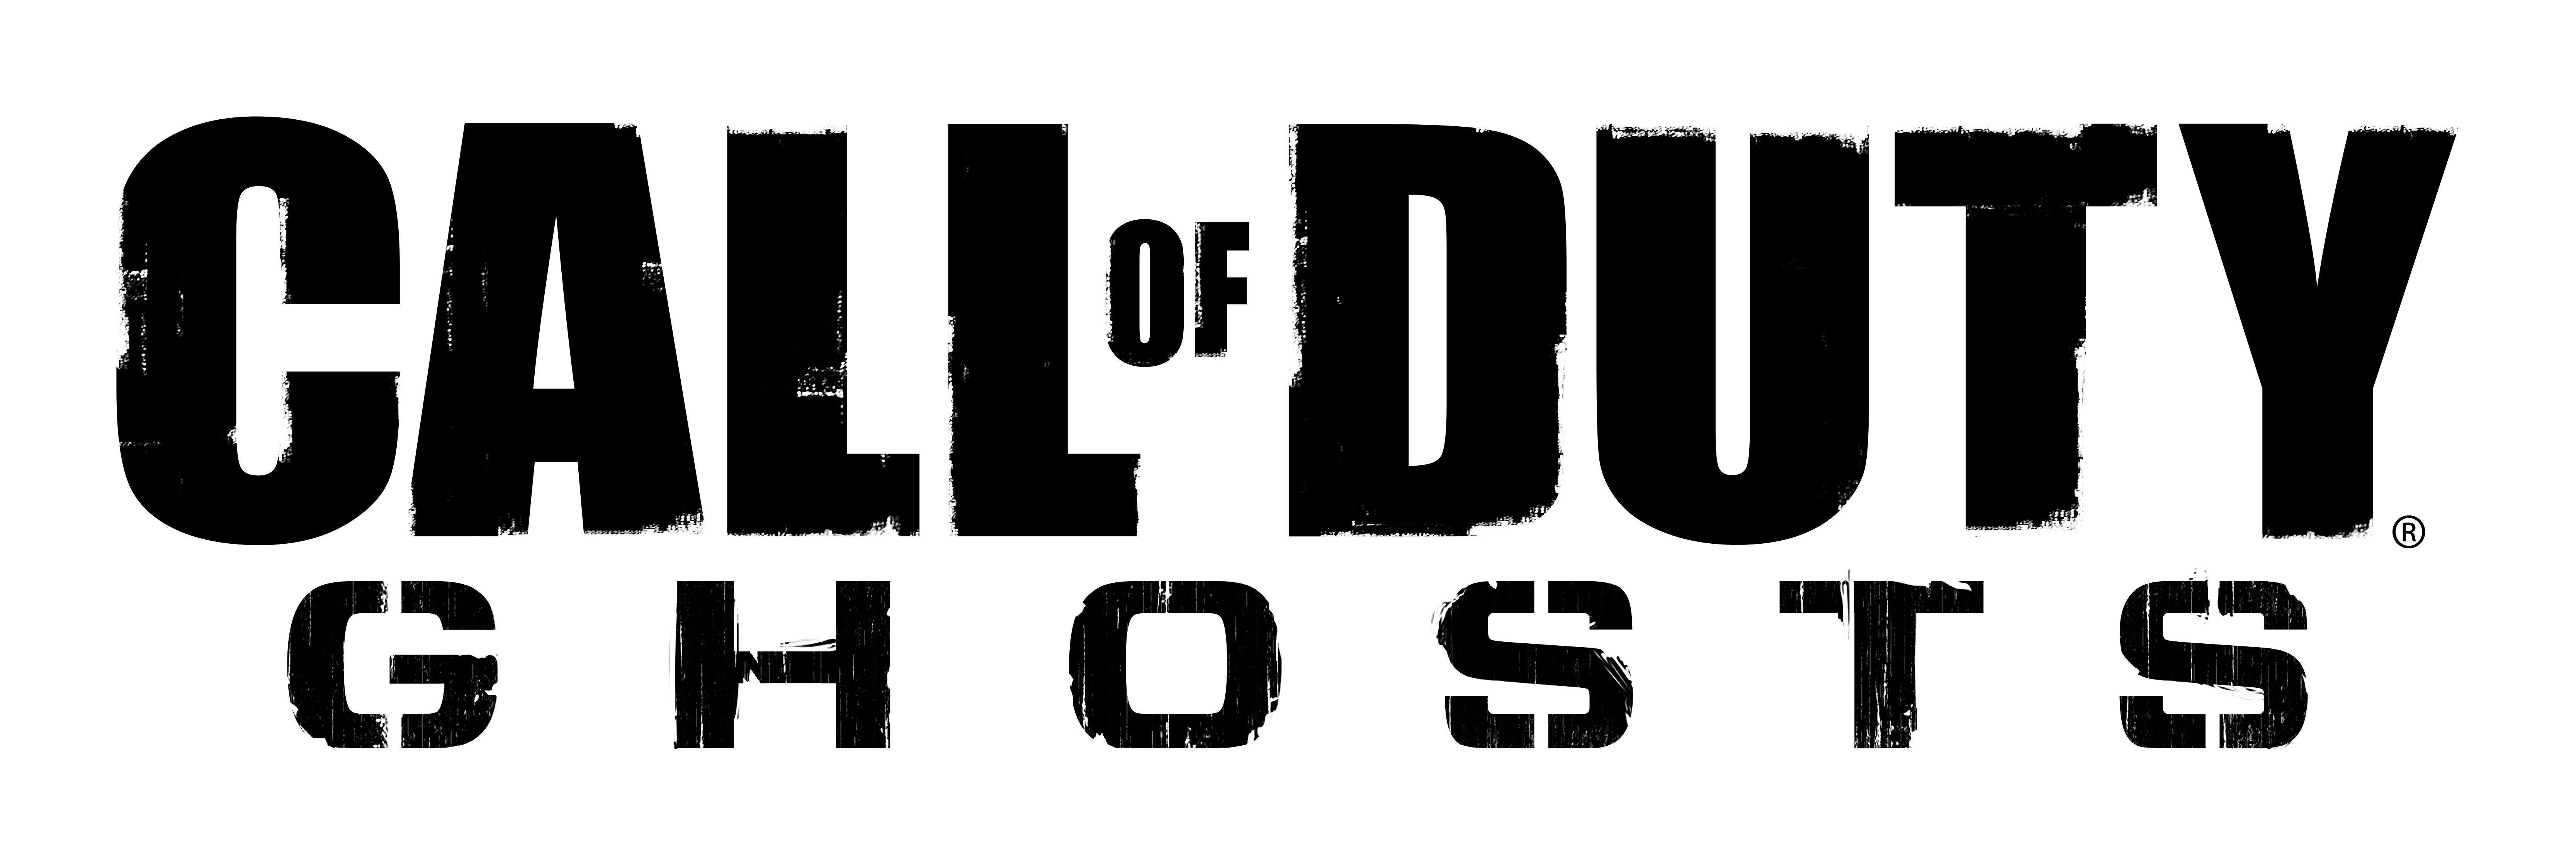 Call of Duty Logo - Call of Duty: Ghosts Revealed | GamingShogun